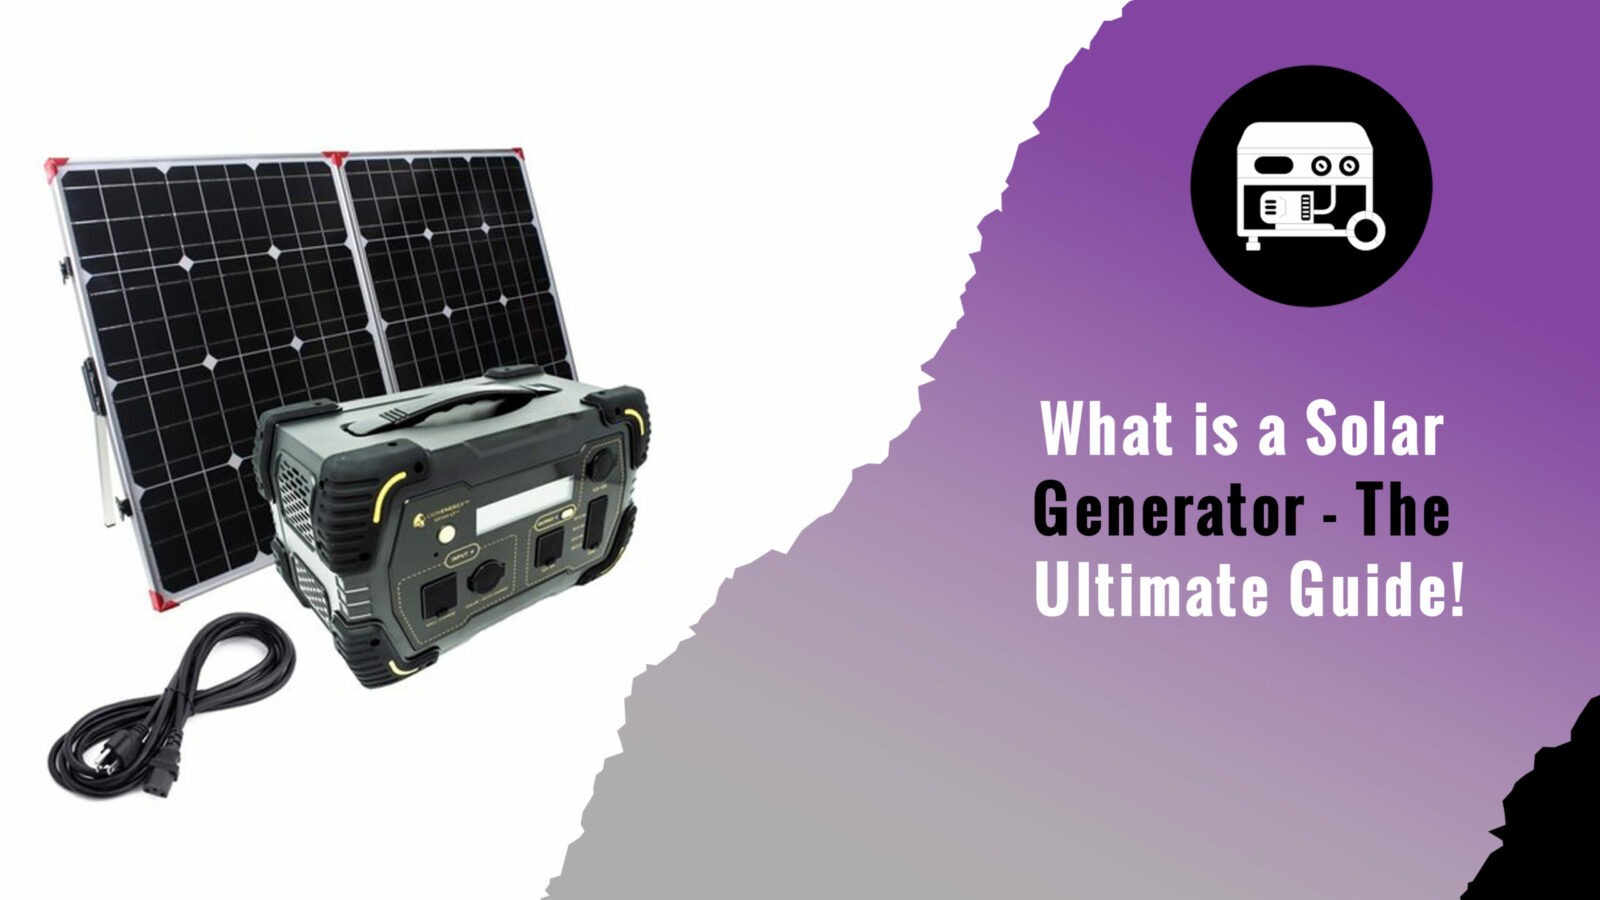 What is a Solar Generator - The Ultimate Guide!